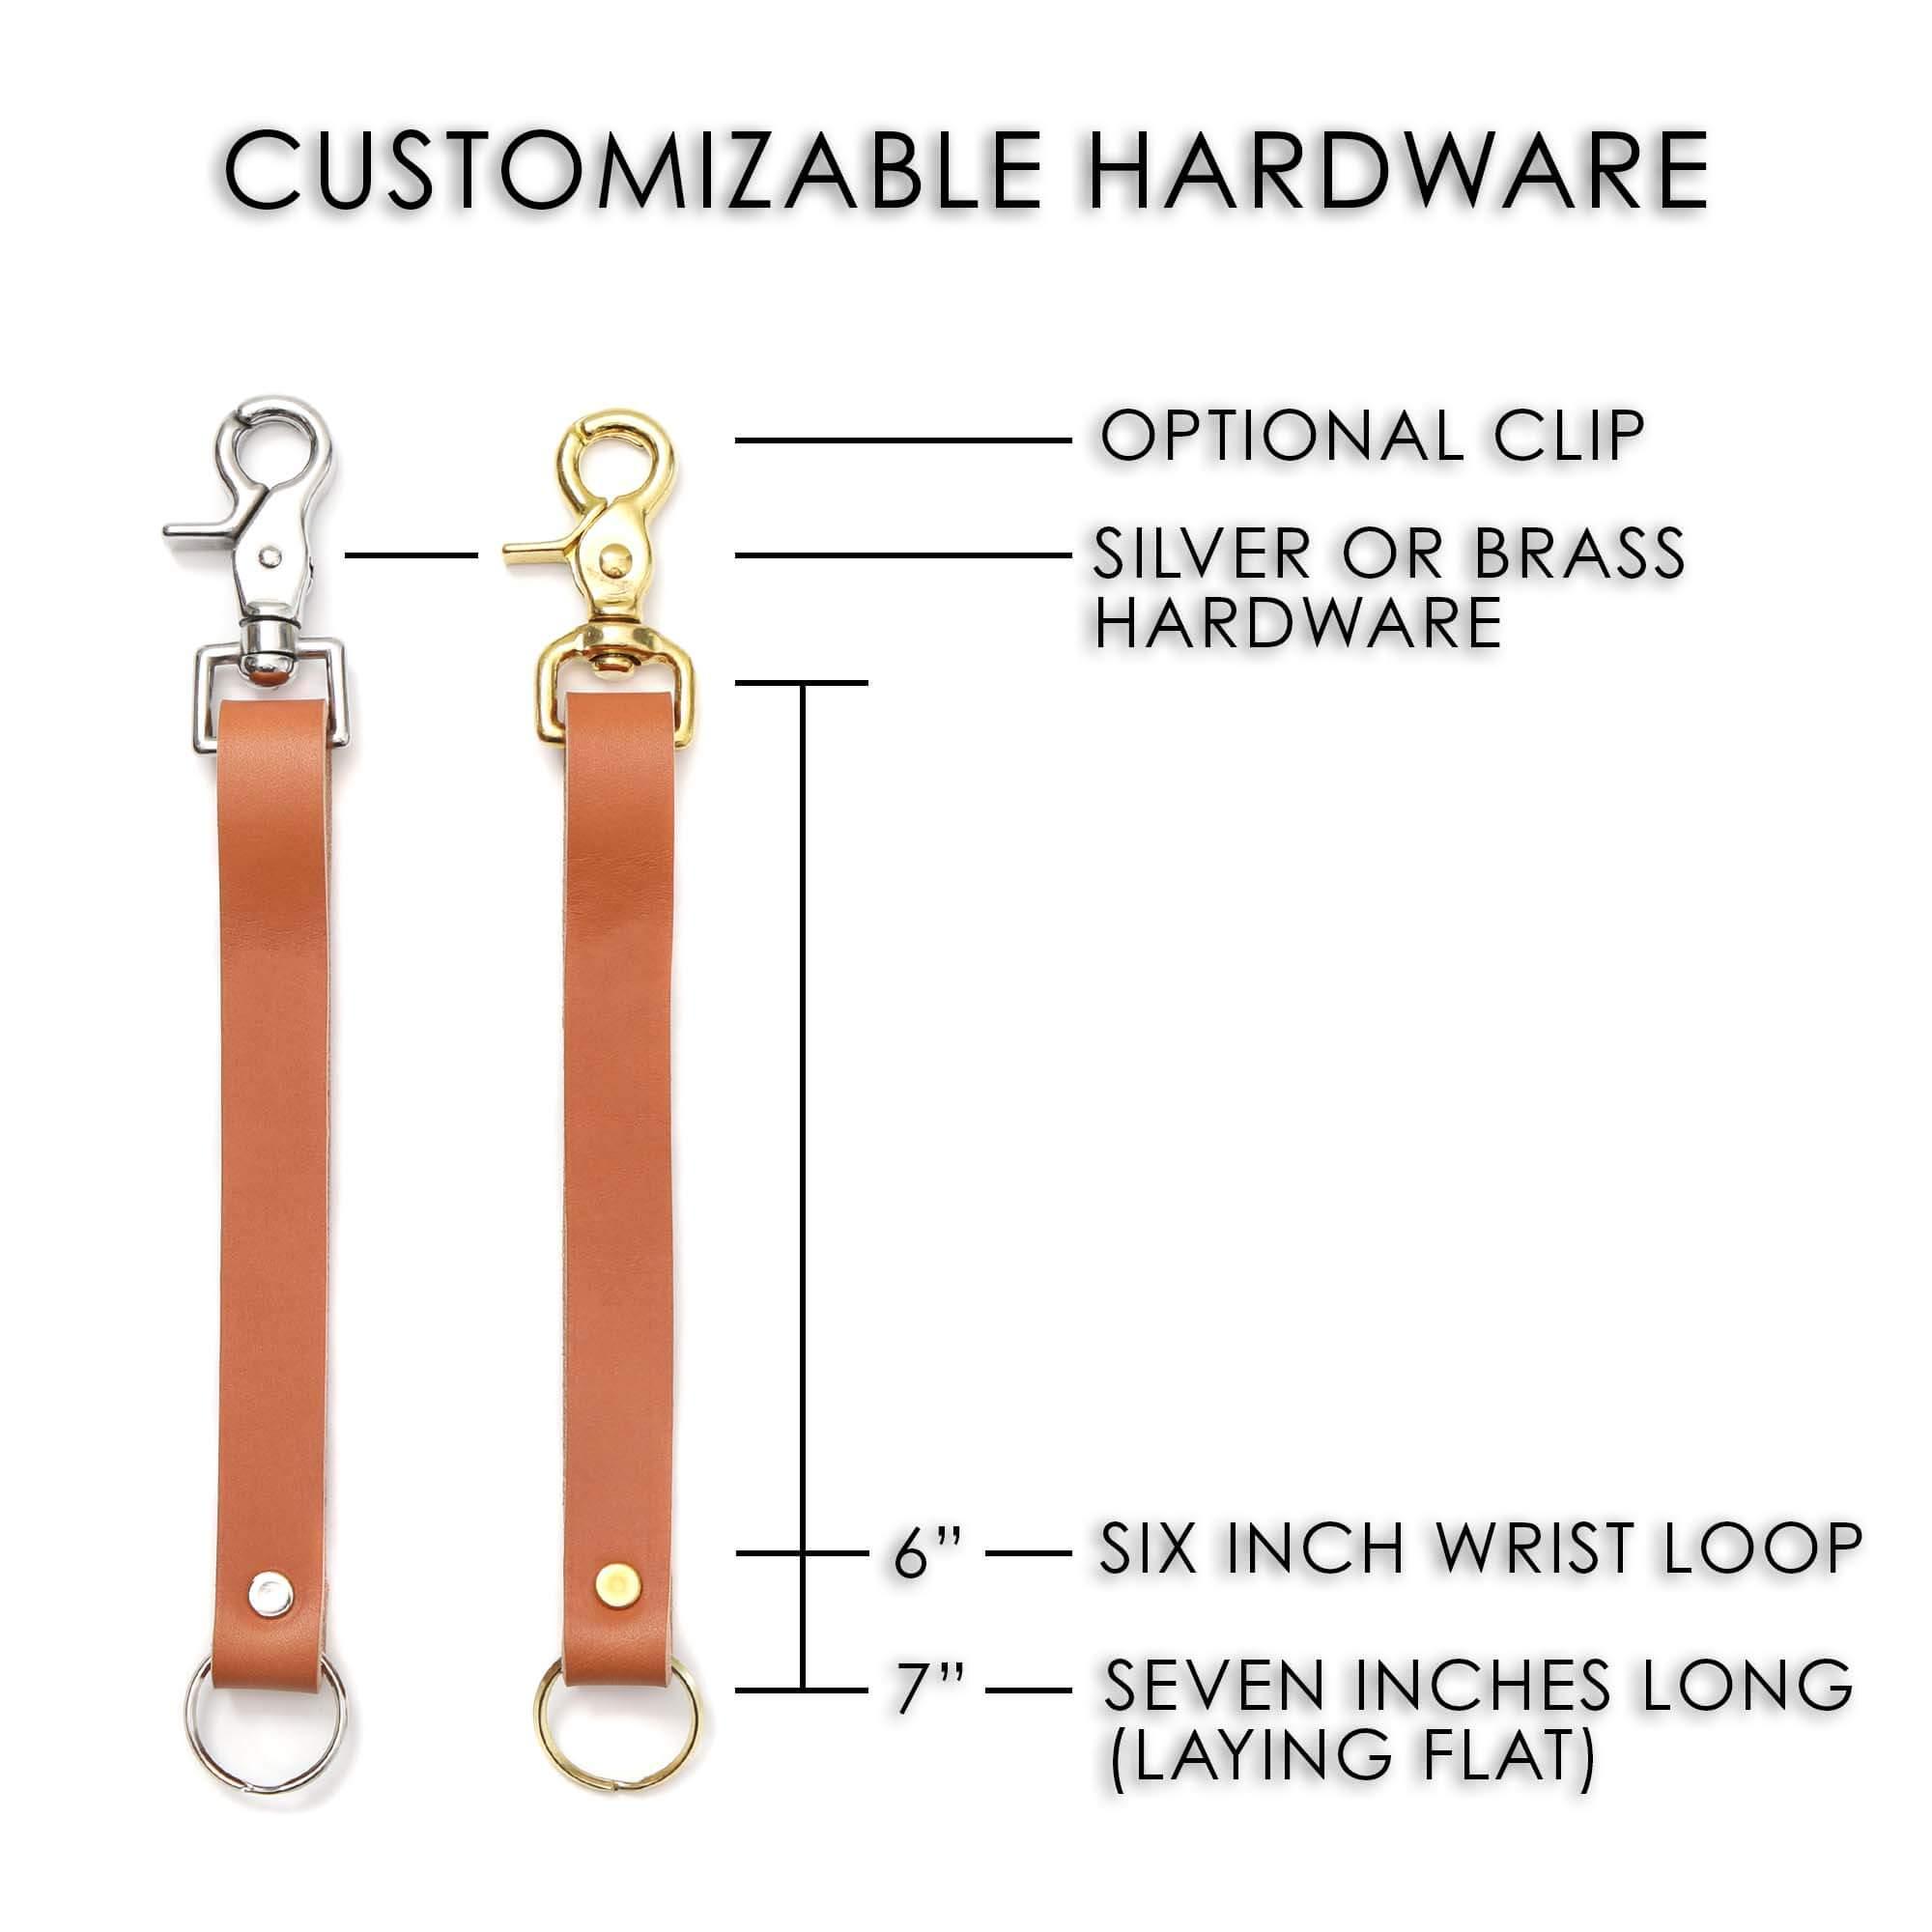 1.5 Clip - Engraved with Hardware